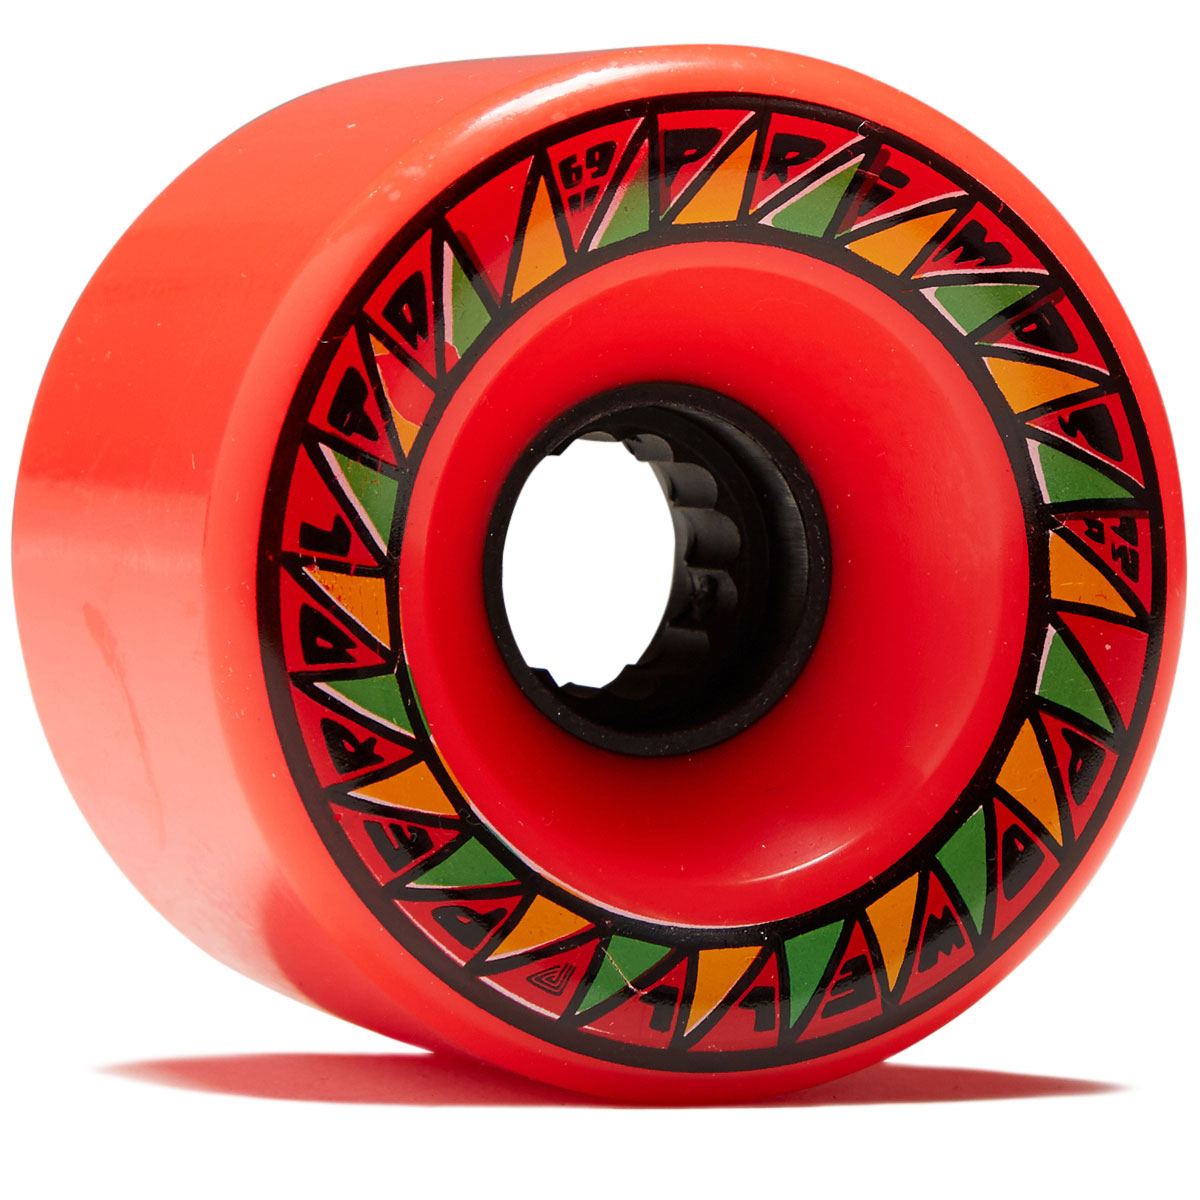 Powell-Peralta Primo 75a Longboard Wheels - Red - 69mm image 1